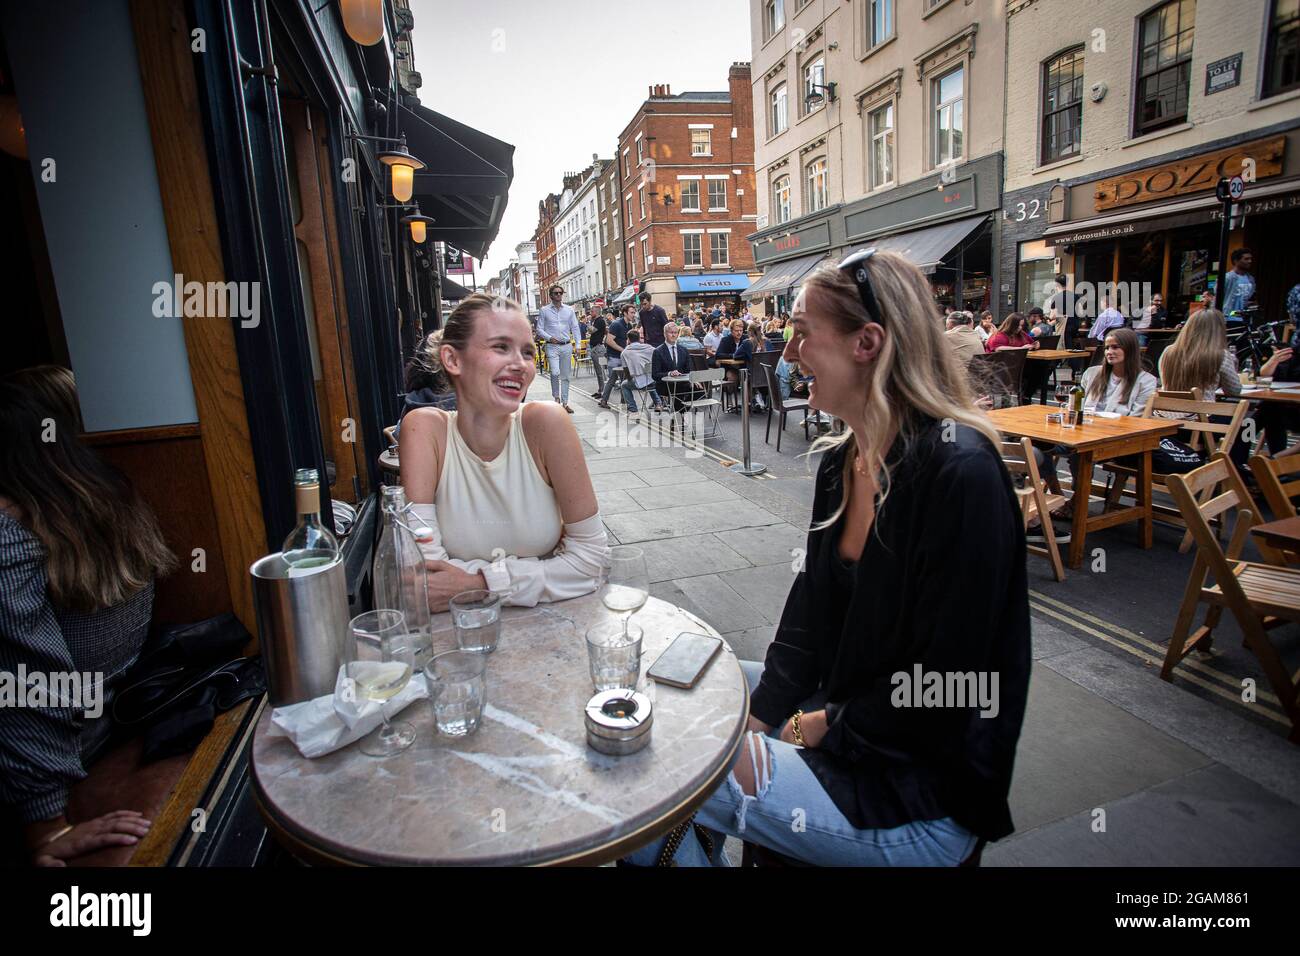 Two young females celebrating 'freedom day' ending over a year of COVID-19 lockdown restrictions in England people drinking on tables placed outside o Stock Photo